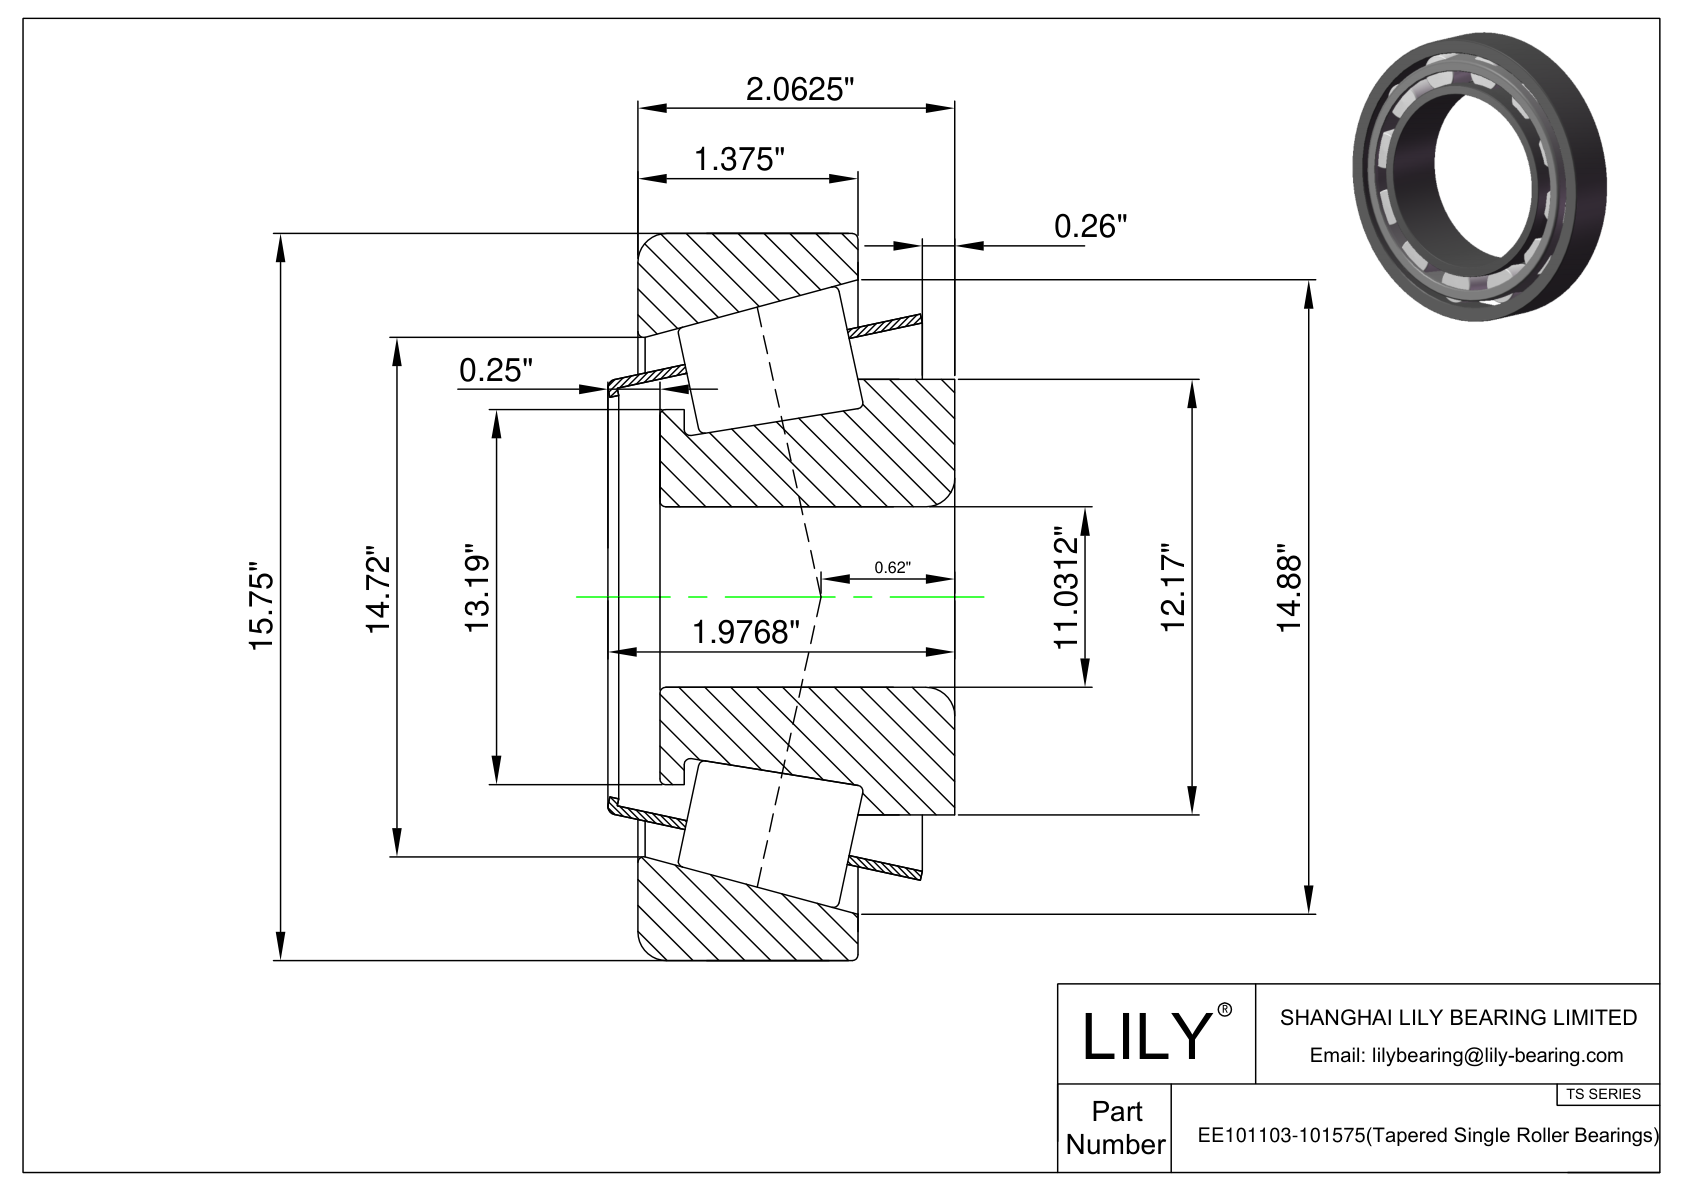 EE101103-101575 TS (Tapered Single Roller Bearings) (Imperial) cad drawing